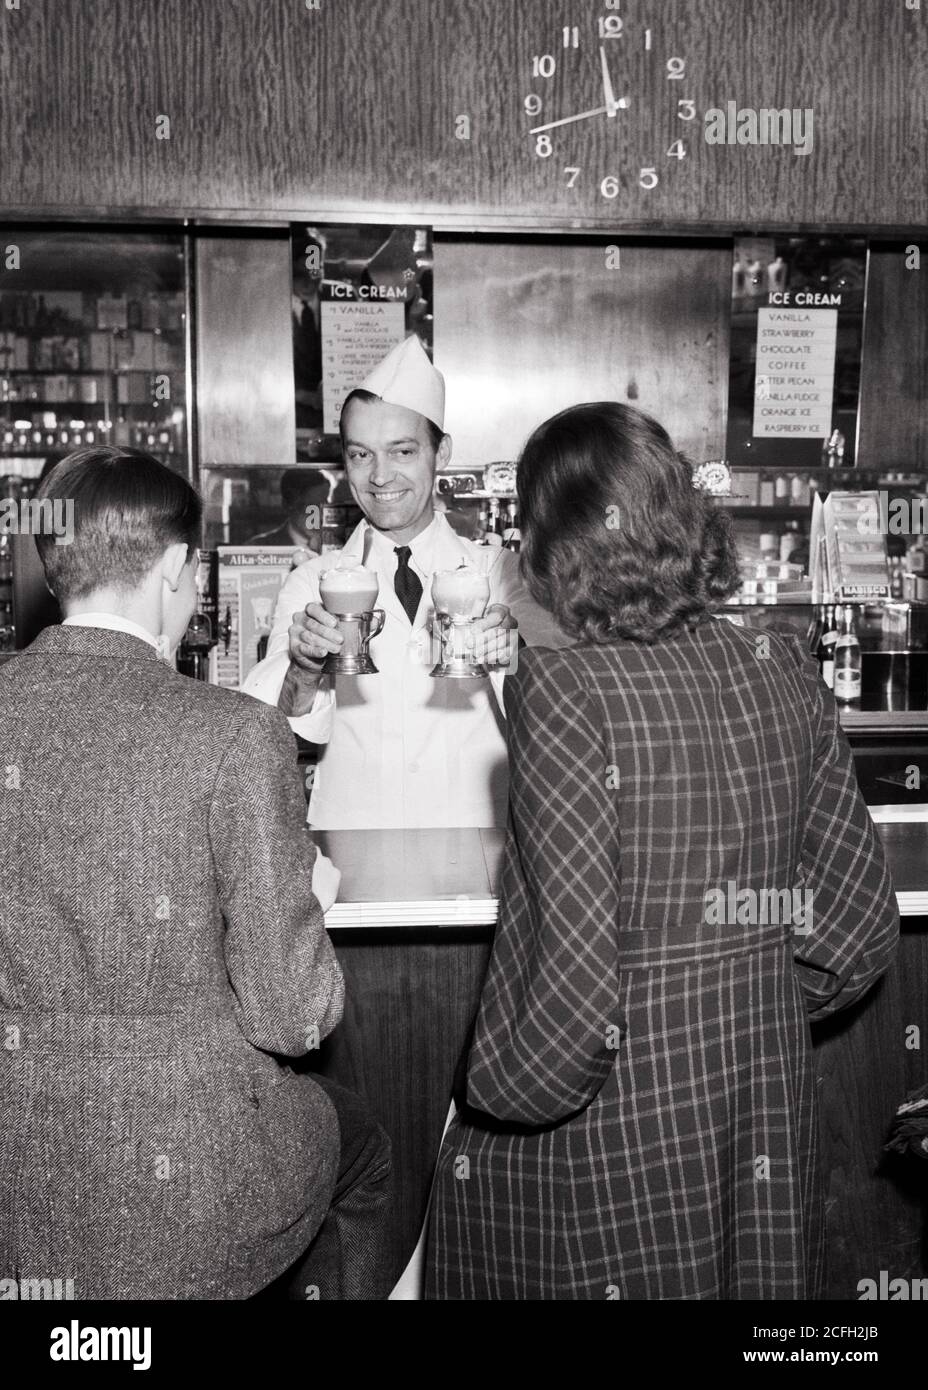 1930s 1940s BACK VIEW TEEN BOY AND GIRL BEING SERVED ICE CREAM SODAS AT FOUNTAIN COUNTER BY SMILING MAN SODA JERK FACING THEM - q40301 CPC001 HARS SUBURBAN SODA URBAN OLD TIME NOSTALGIA OLD FASHION 1 JUVENILE COMMUNICATION YOUNG ADULT PLEASED JOY LIFESTYLE SATISFACTION FEMALES JOBS COPY SPACE FRIENDSHIP PERSONS MALES TEENAGE GIRL TEENAGE BOY CONFIDENCE B&W SKILL OCCUPATION HAPPINESS SKILLS CHEERFUL CUSTOMERS CUSTOMER SERVICE PRIDE REAR VIEW OCCUPATIONS SMILES SODA JERK SERVER FROM BEHIND JOYFUL TEENAGED ICE CREAM BACK VIEW JUVENILES MID-ADULT MID-ADULT MAN YOUNG ADULT MAN BLACK AND WHITE Stock Photo